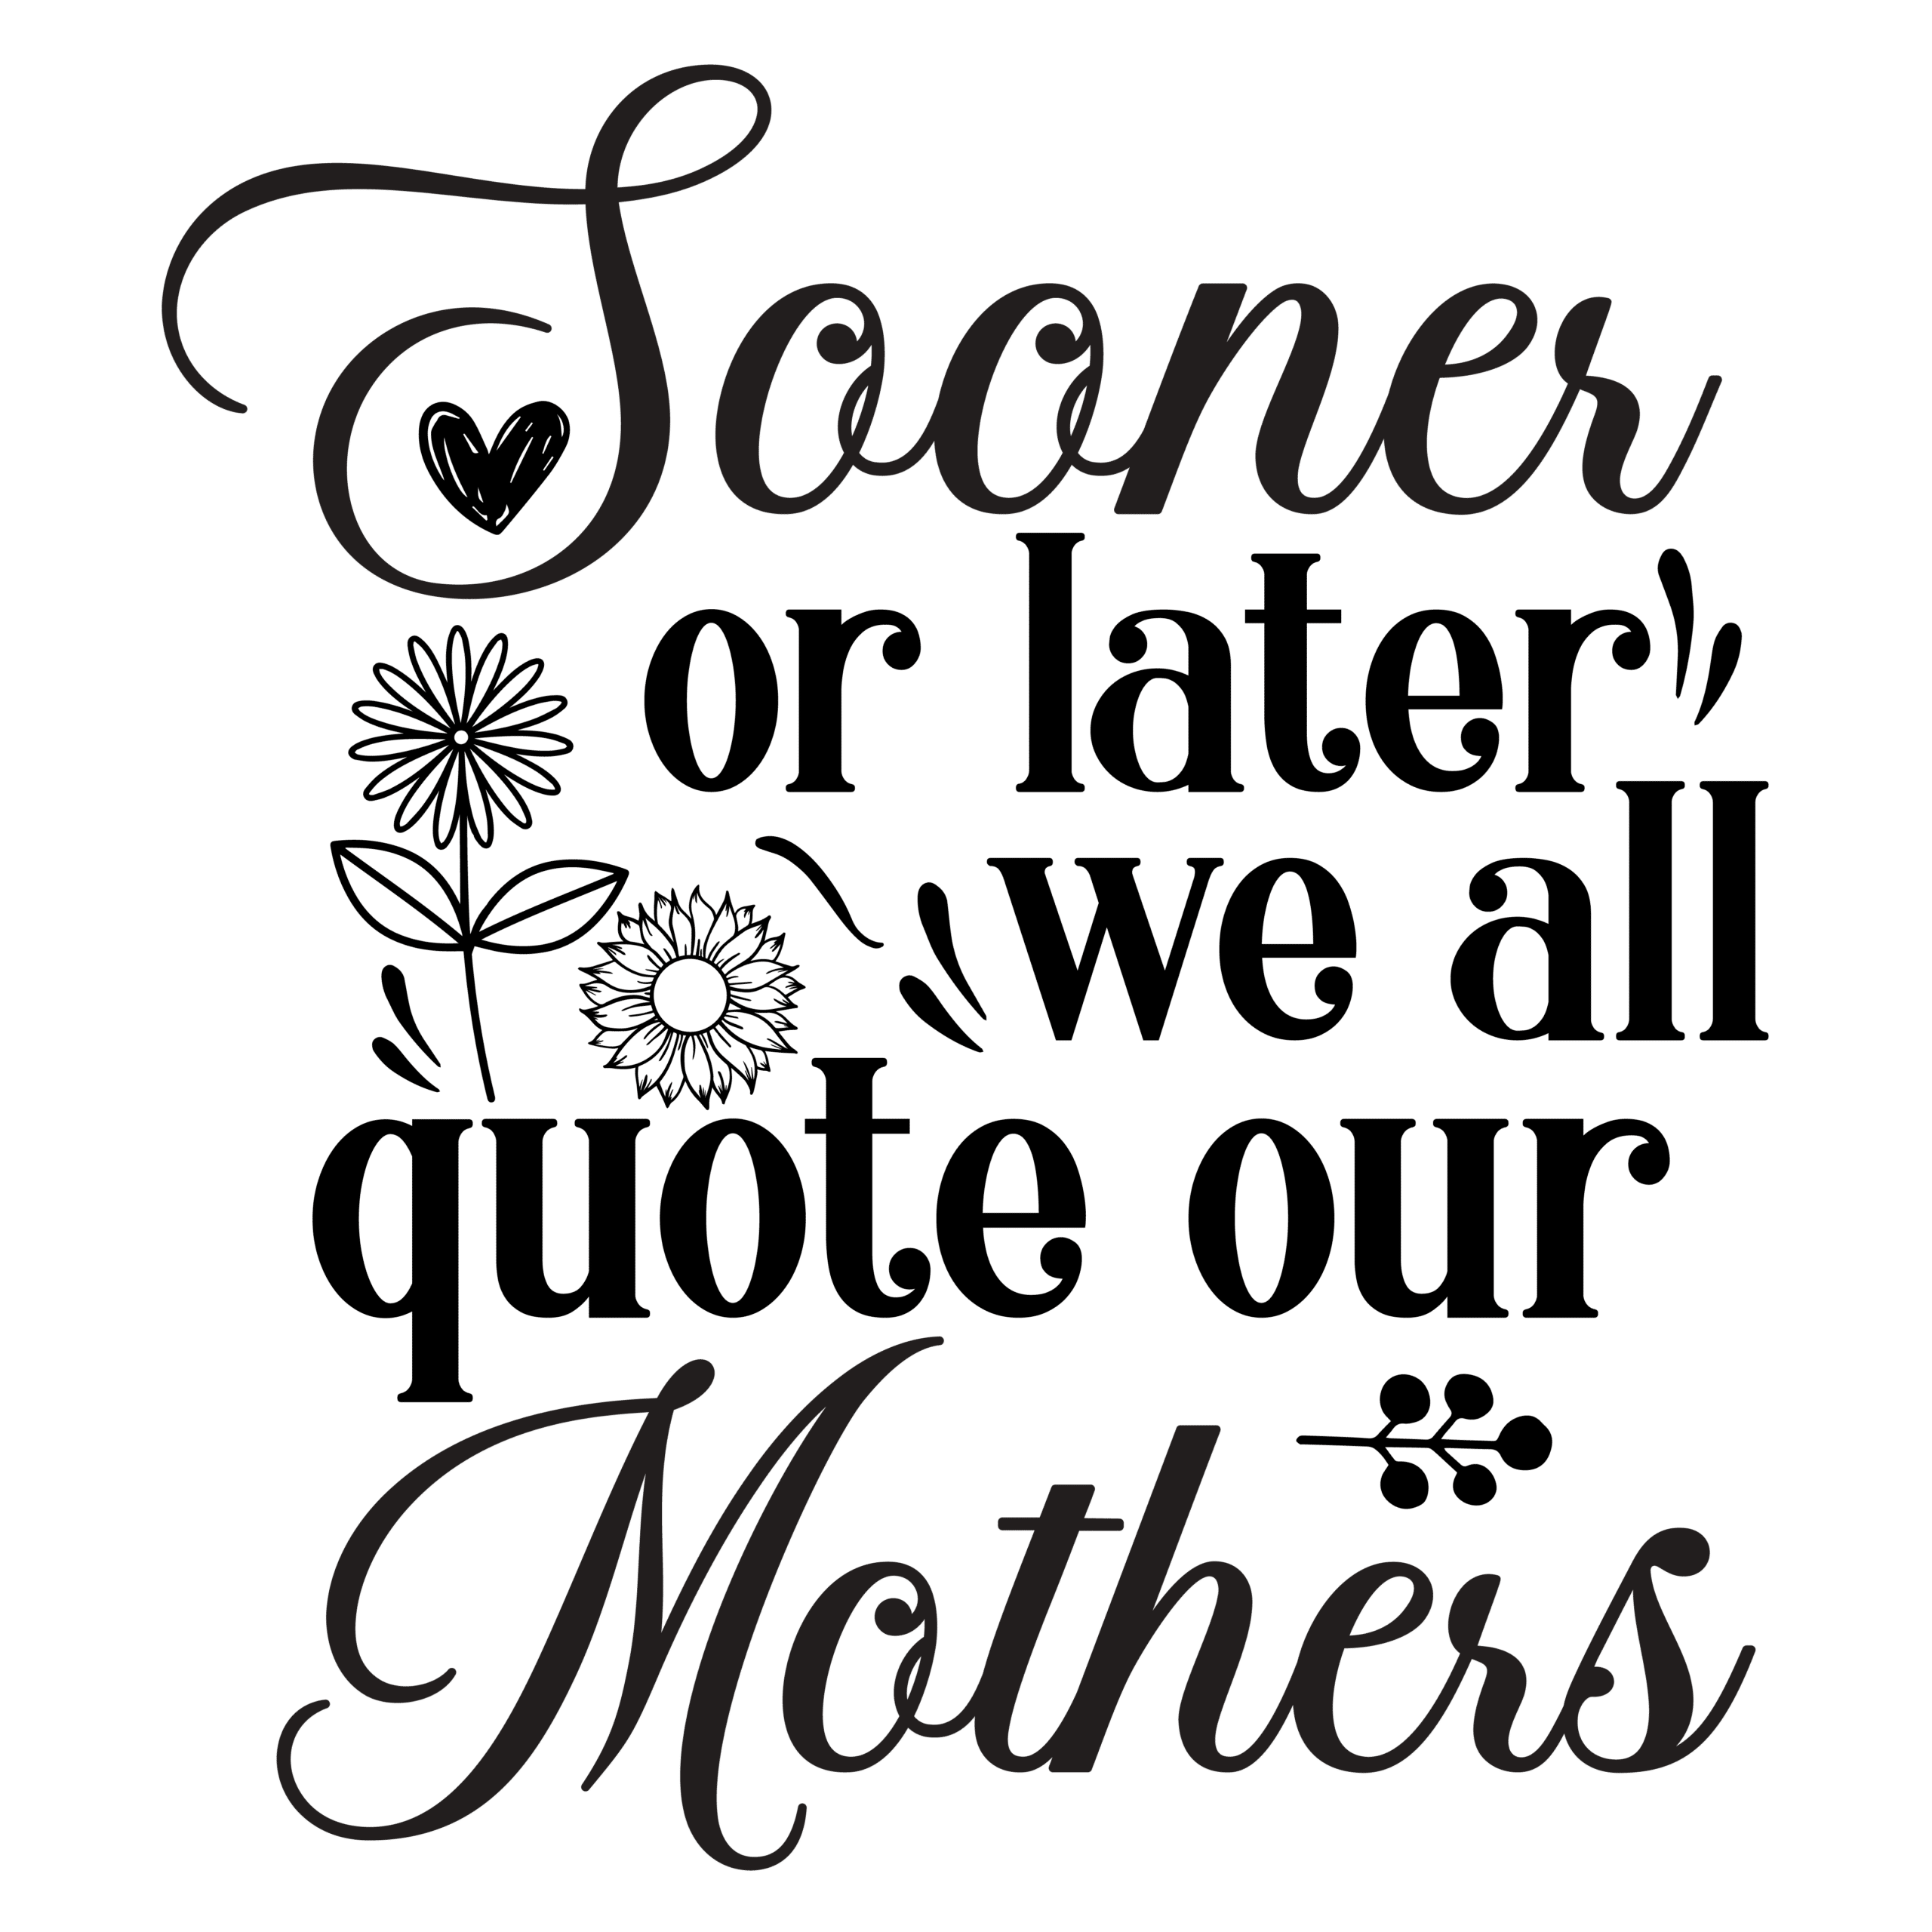 Sooner or later we all quote our mothers-01